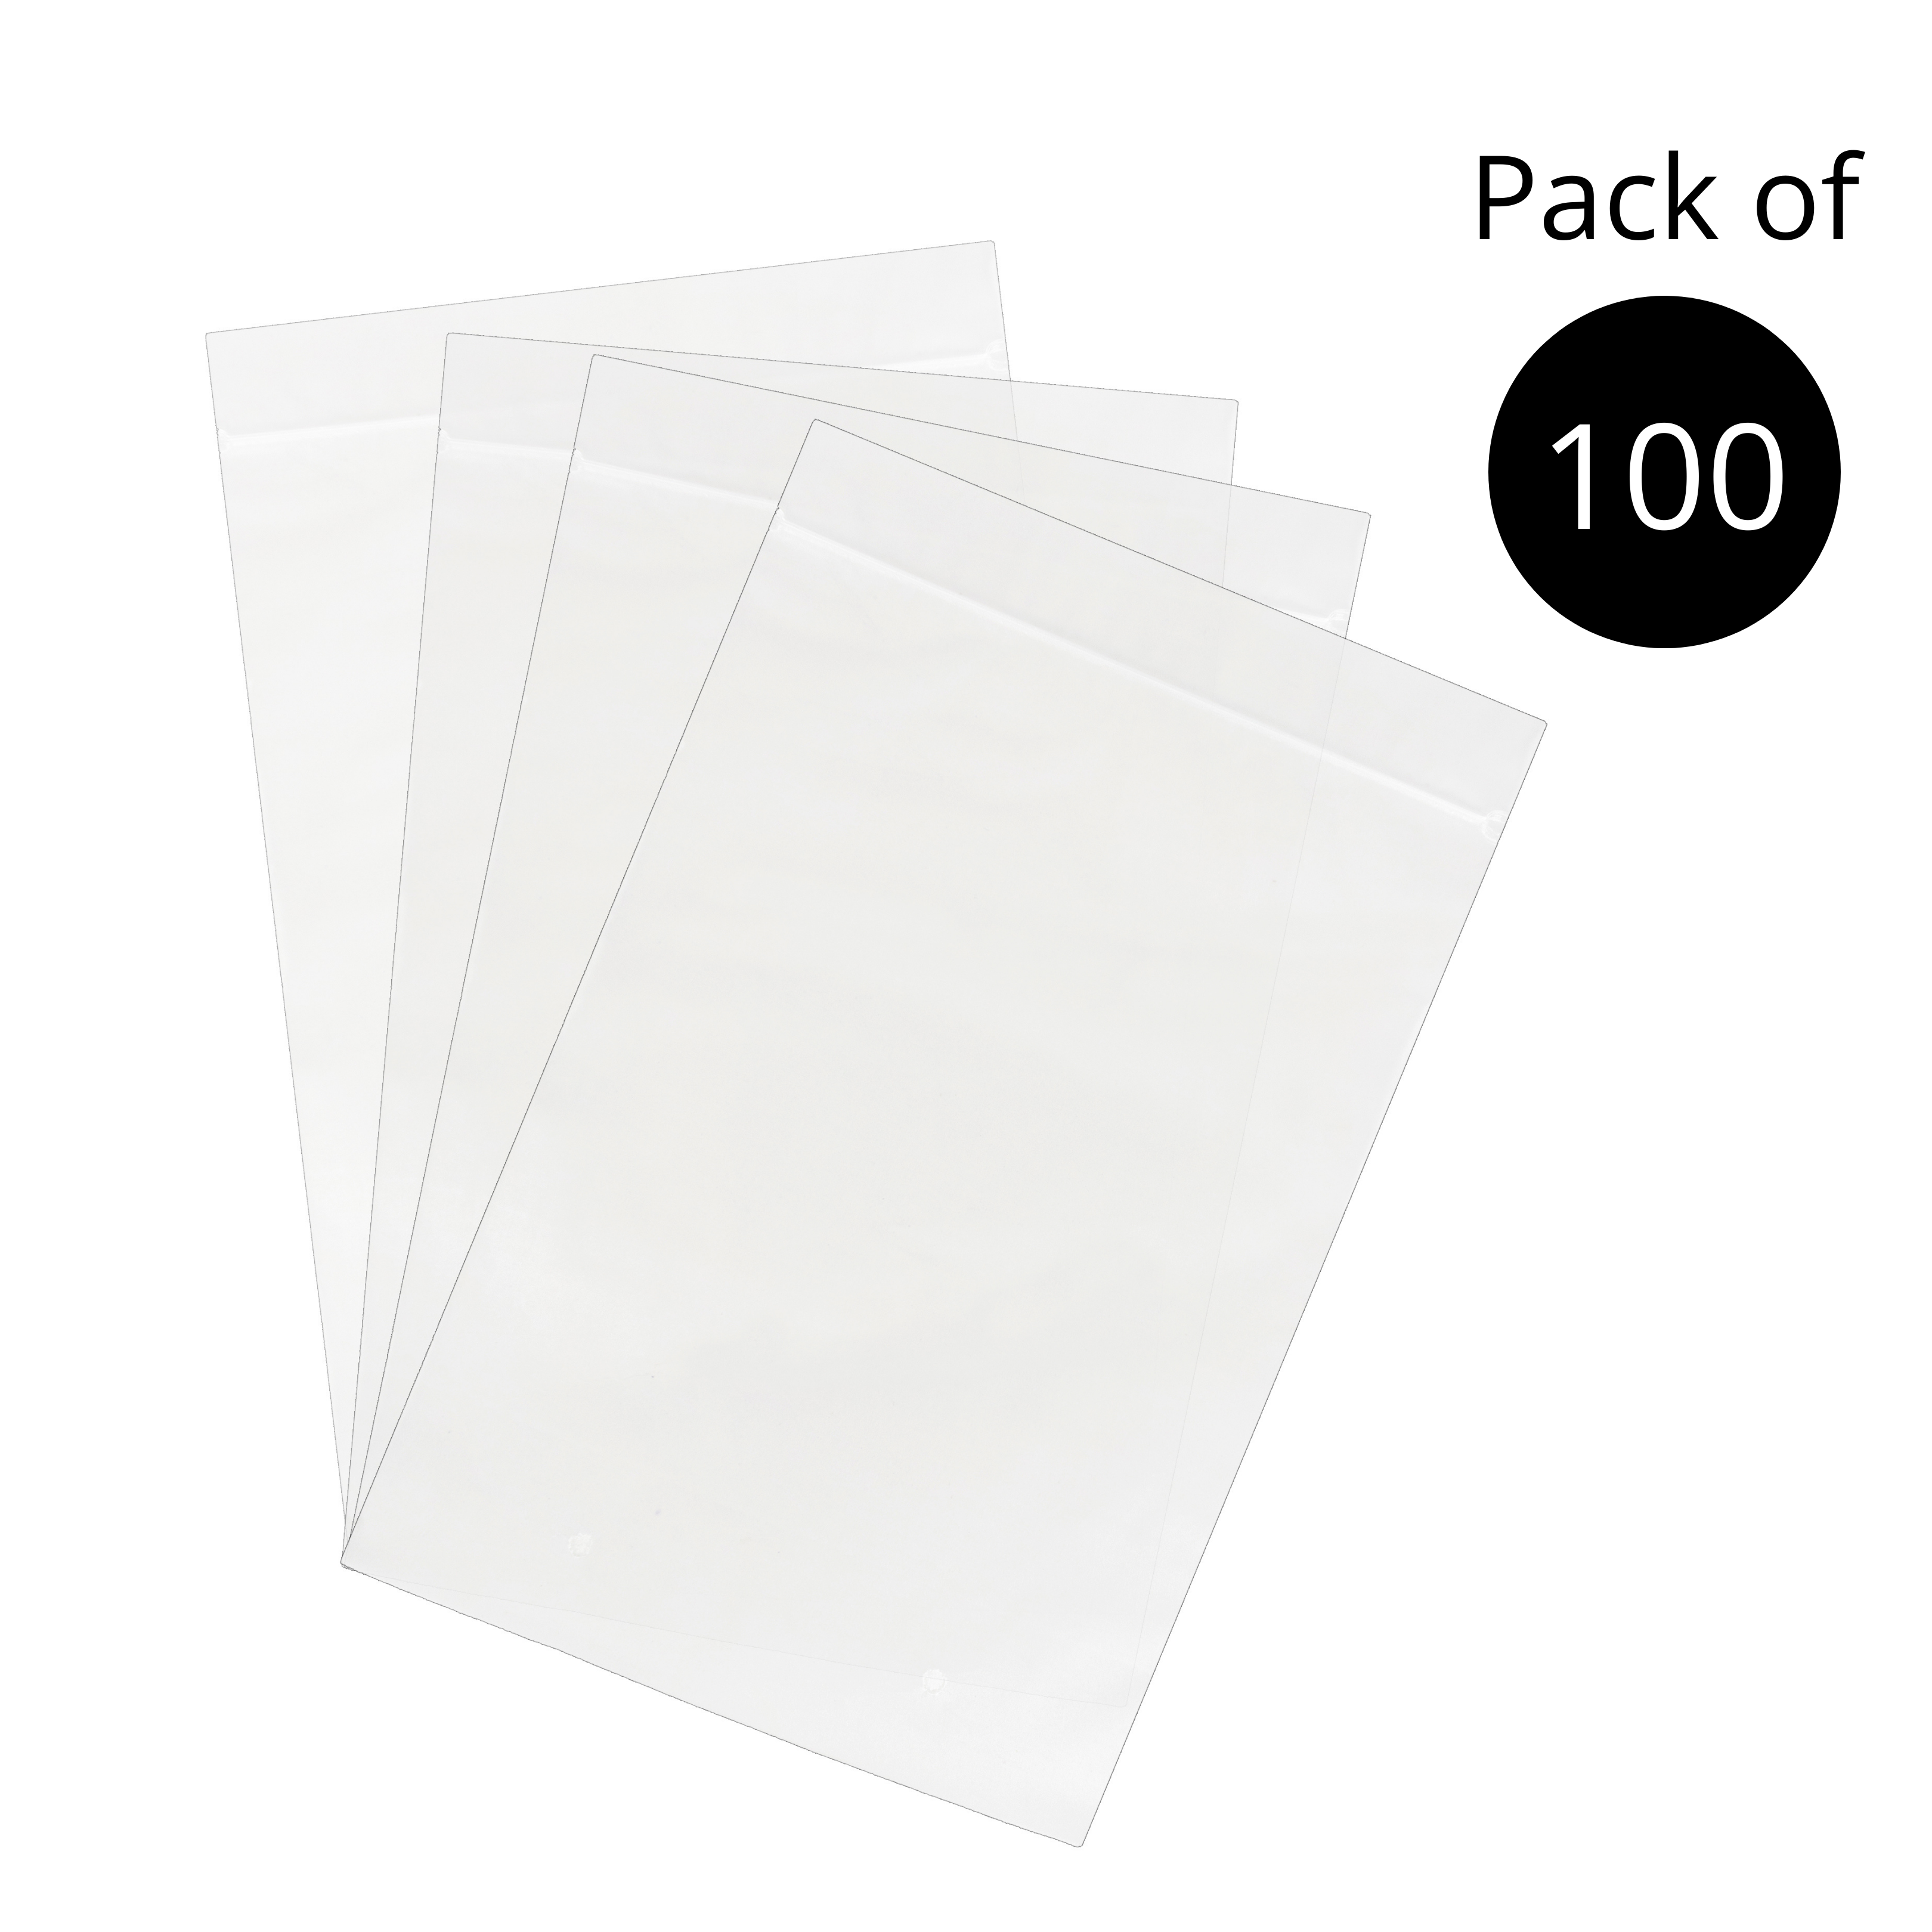 InfinitePack 50 Pack 11x15 inch Reclosable Poly & Plastic Bags for Packaging Clothes, Shirts, Jeans, Pants, T-Shirts, Frosted Zipper Bags with Vent Hole for Travel Storage, 3 Mil - Infinite Pack